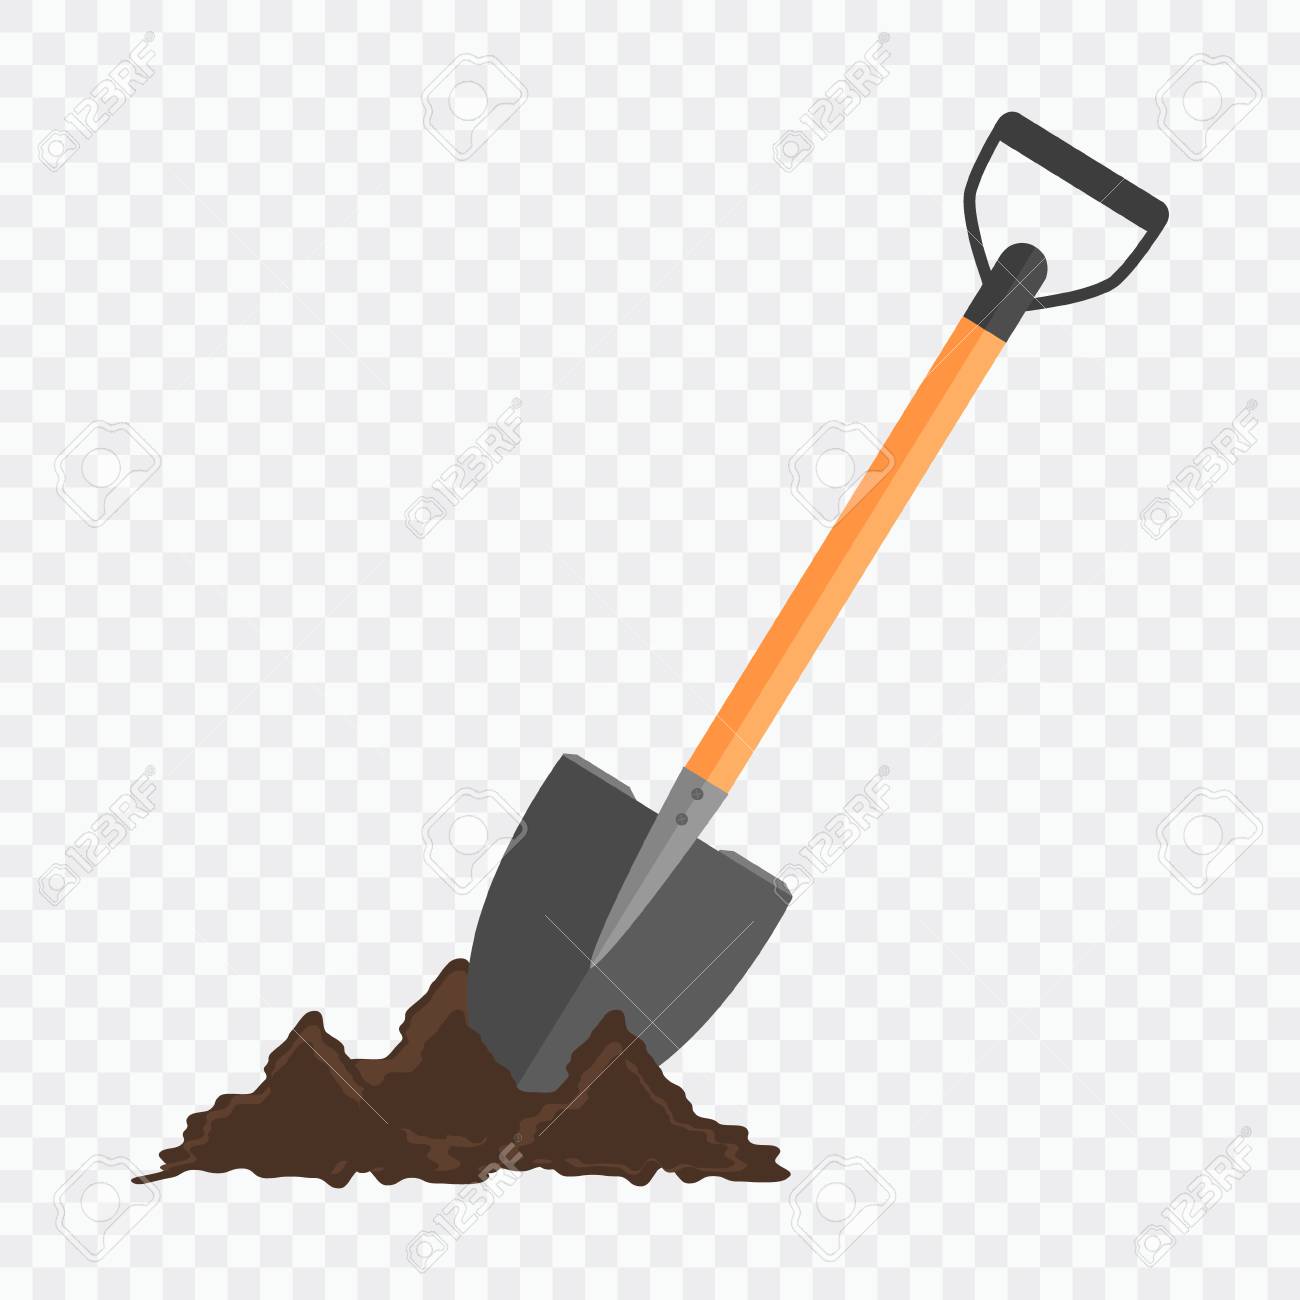 Shovel In The Ground Gardening Tool On Checked Background